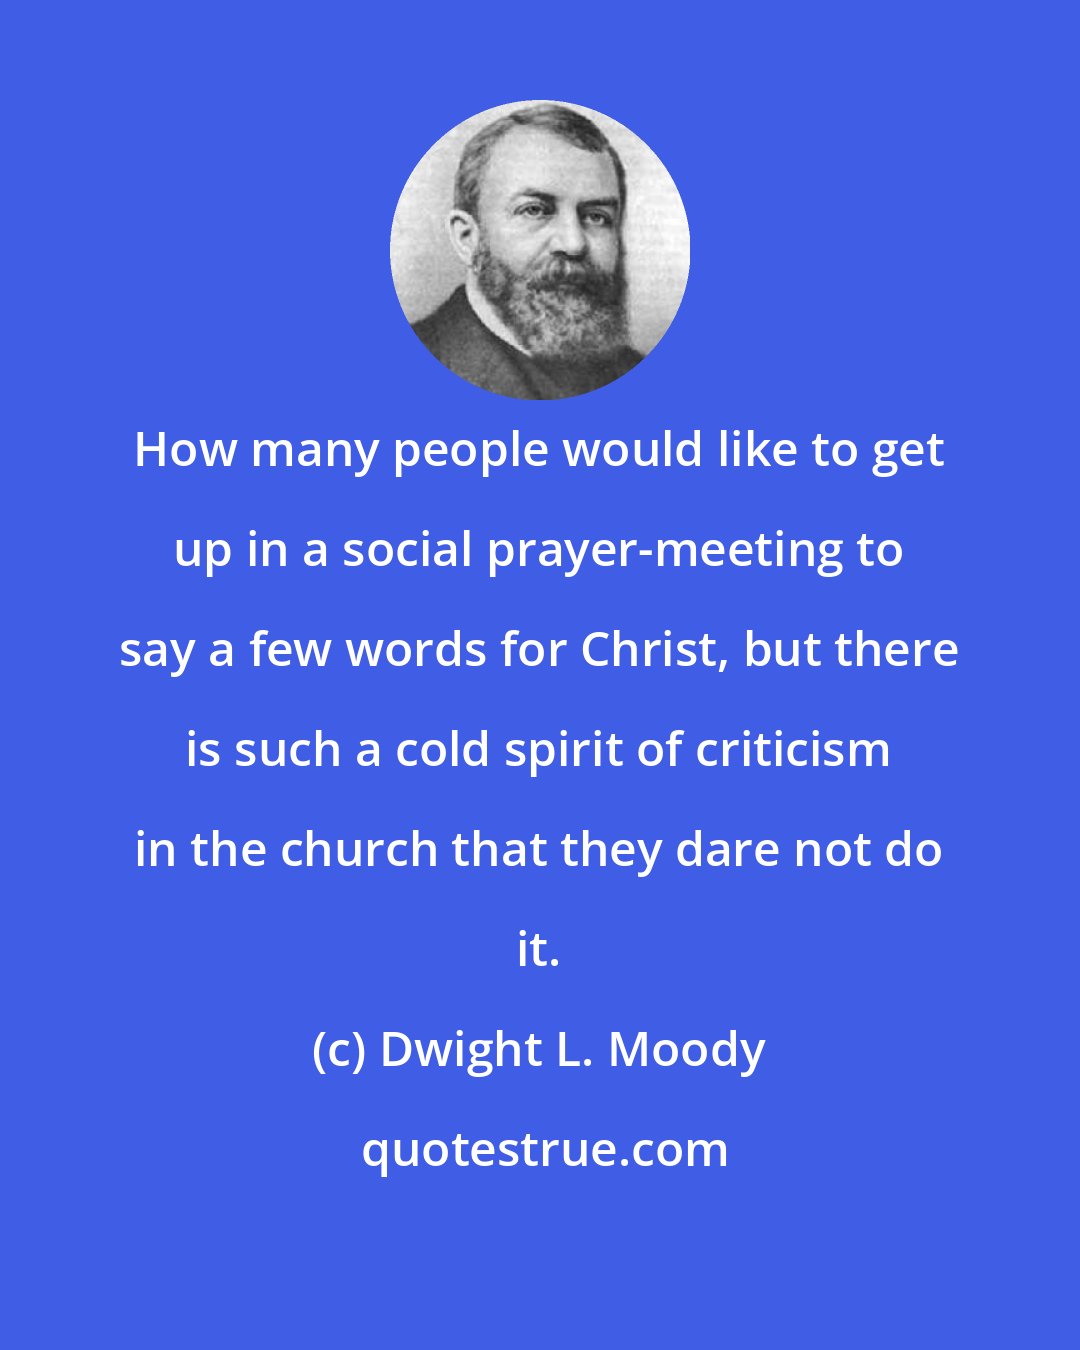 Dwight L. Moody: How many people would like to get up in a social prayer-meeting to say a few words for Christ, but there is such a cold spirit of criticism in the church that they dare not do it.